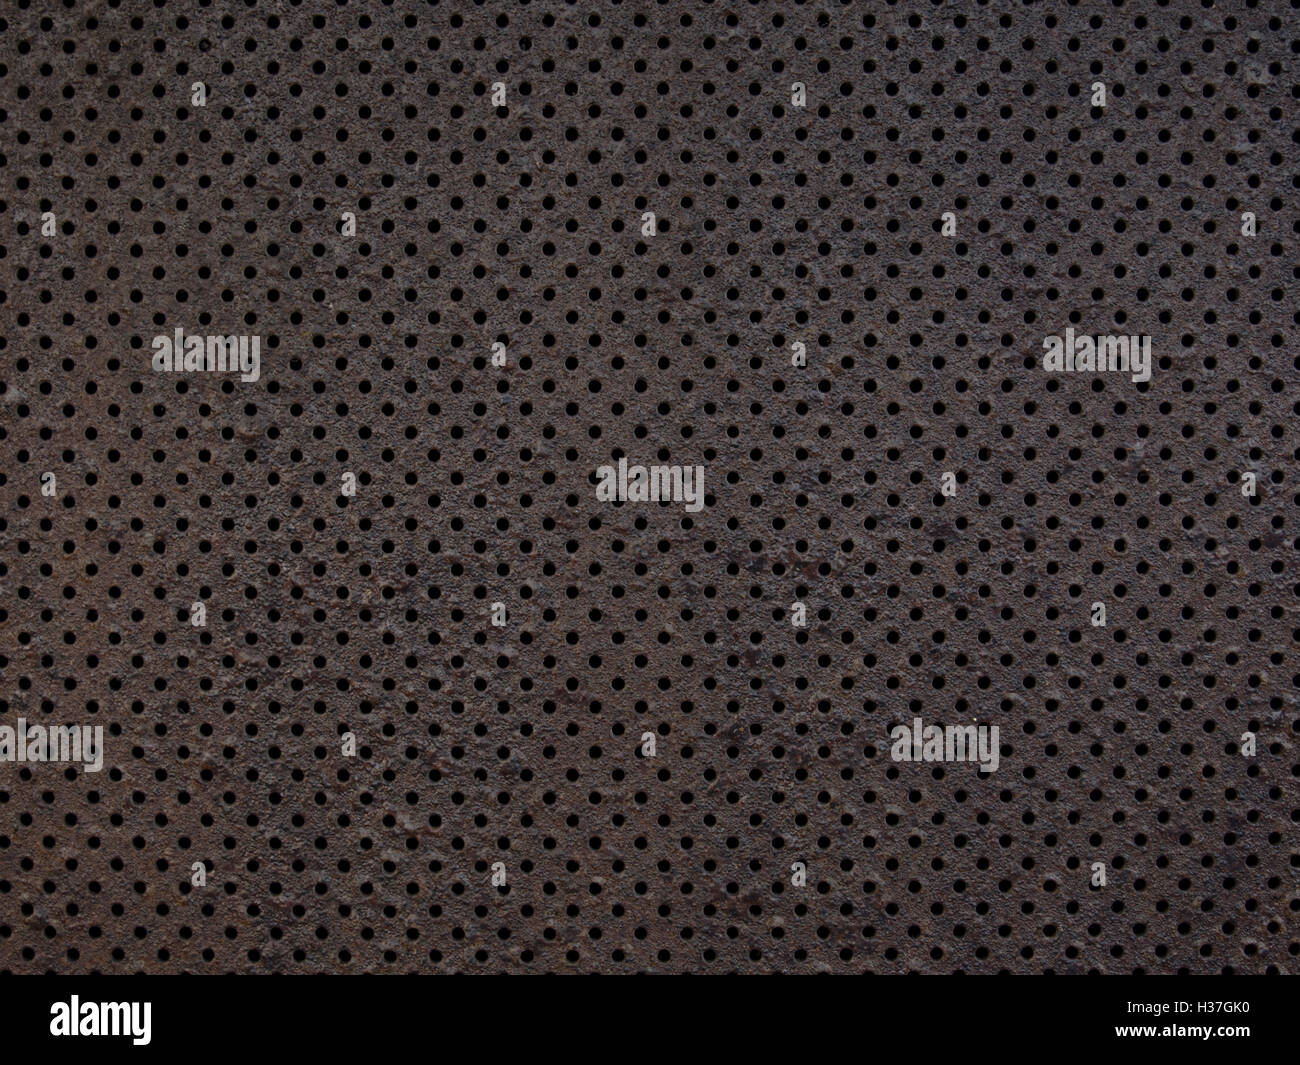 perforated metal texture background Stock Photo